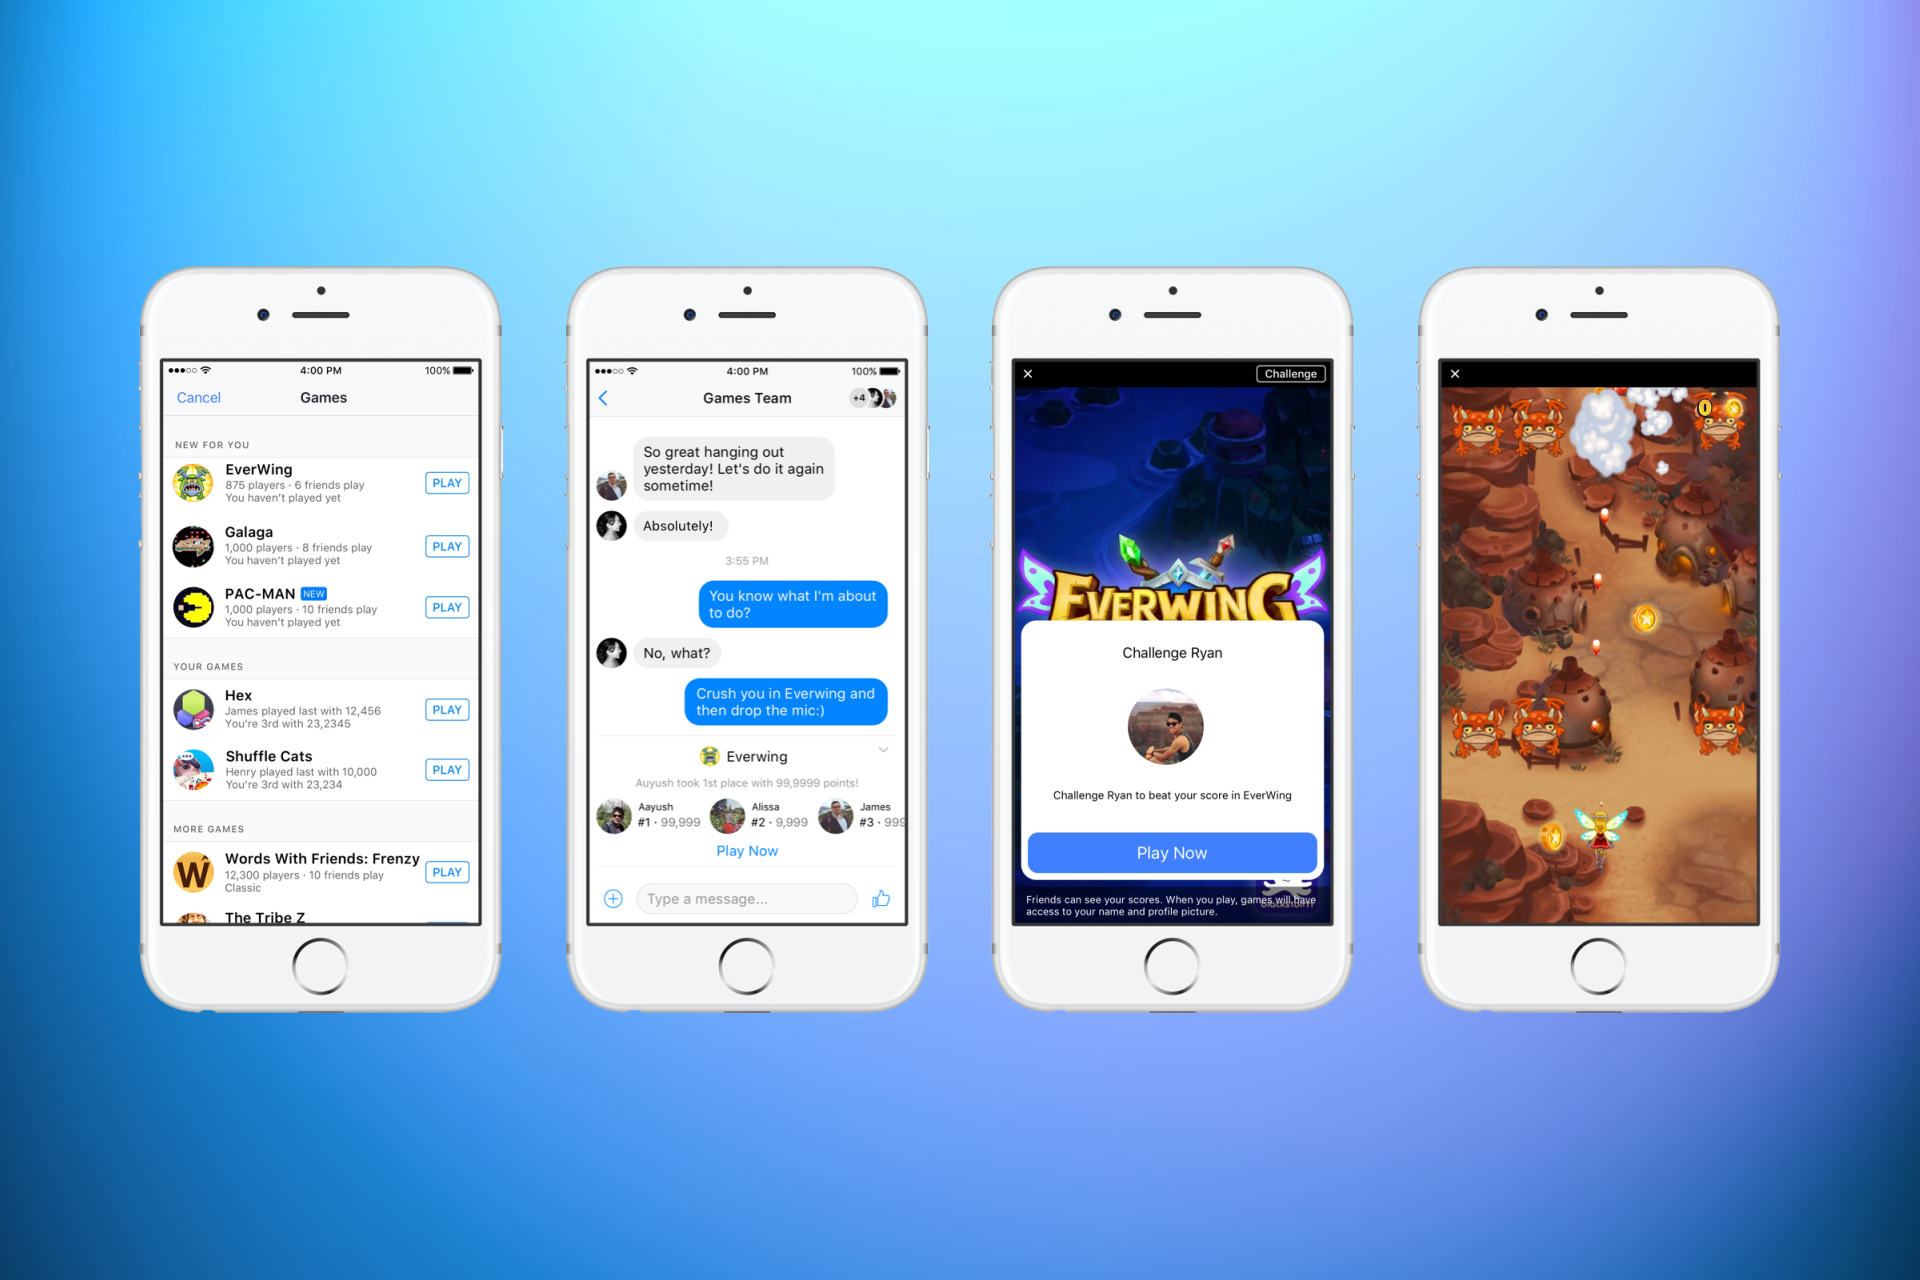 facebook messenger lets you play instant games like pac man here s how to find and play them image 1